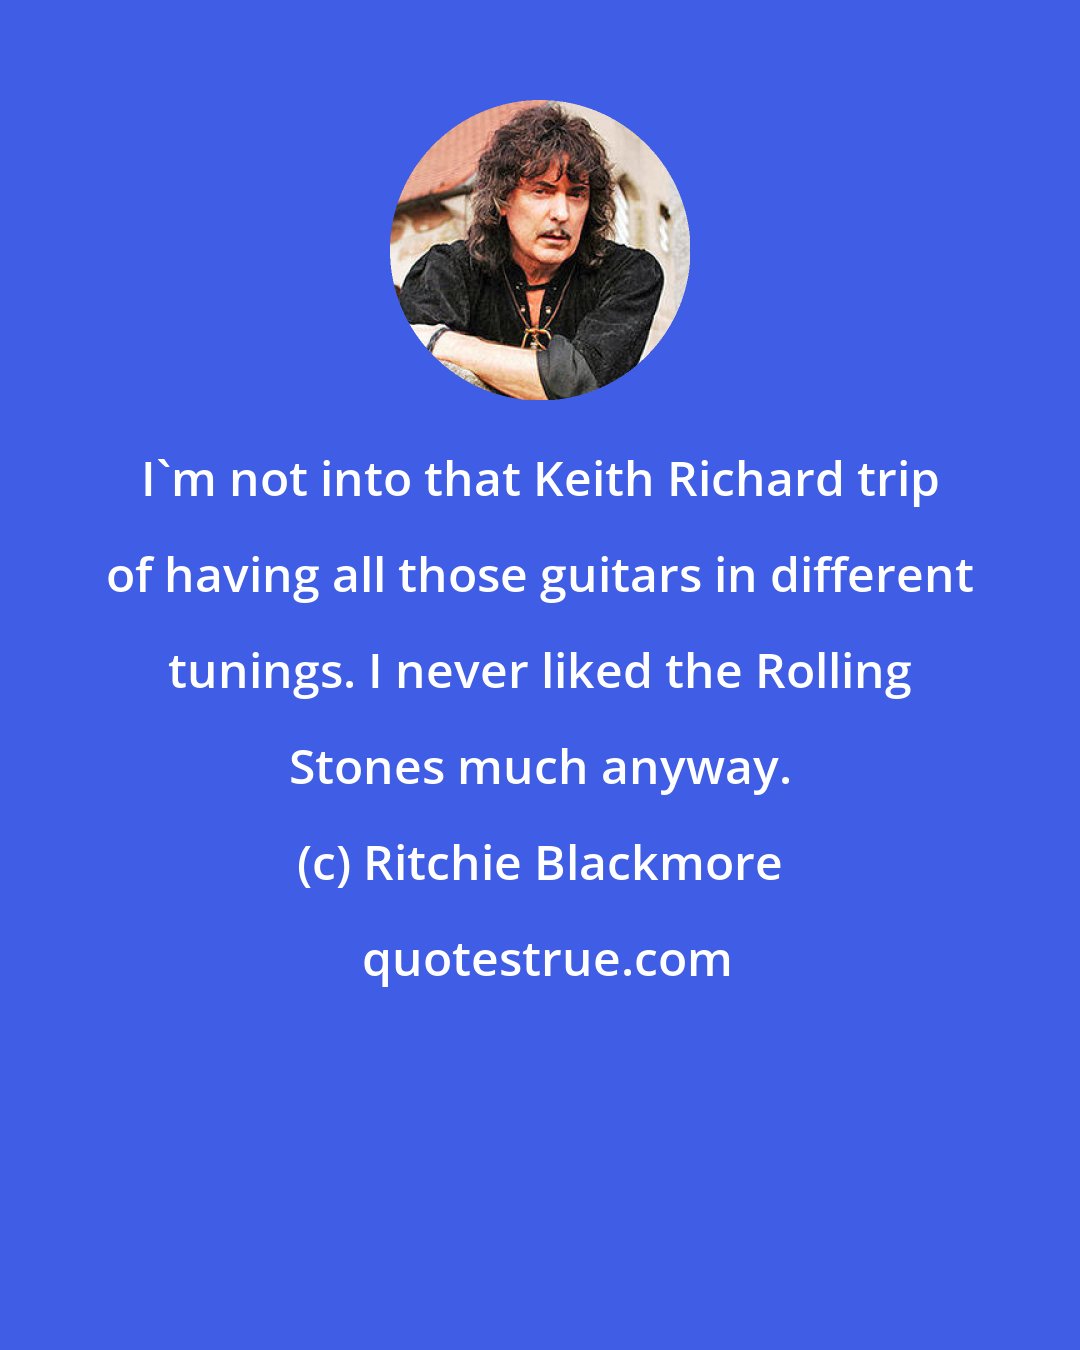 Ritchie Blackmore: I'm not into that Keith Richard trip of having all those guitars in different tunings. I never liked the Rolling Stones much anyway.